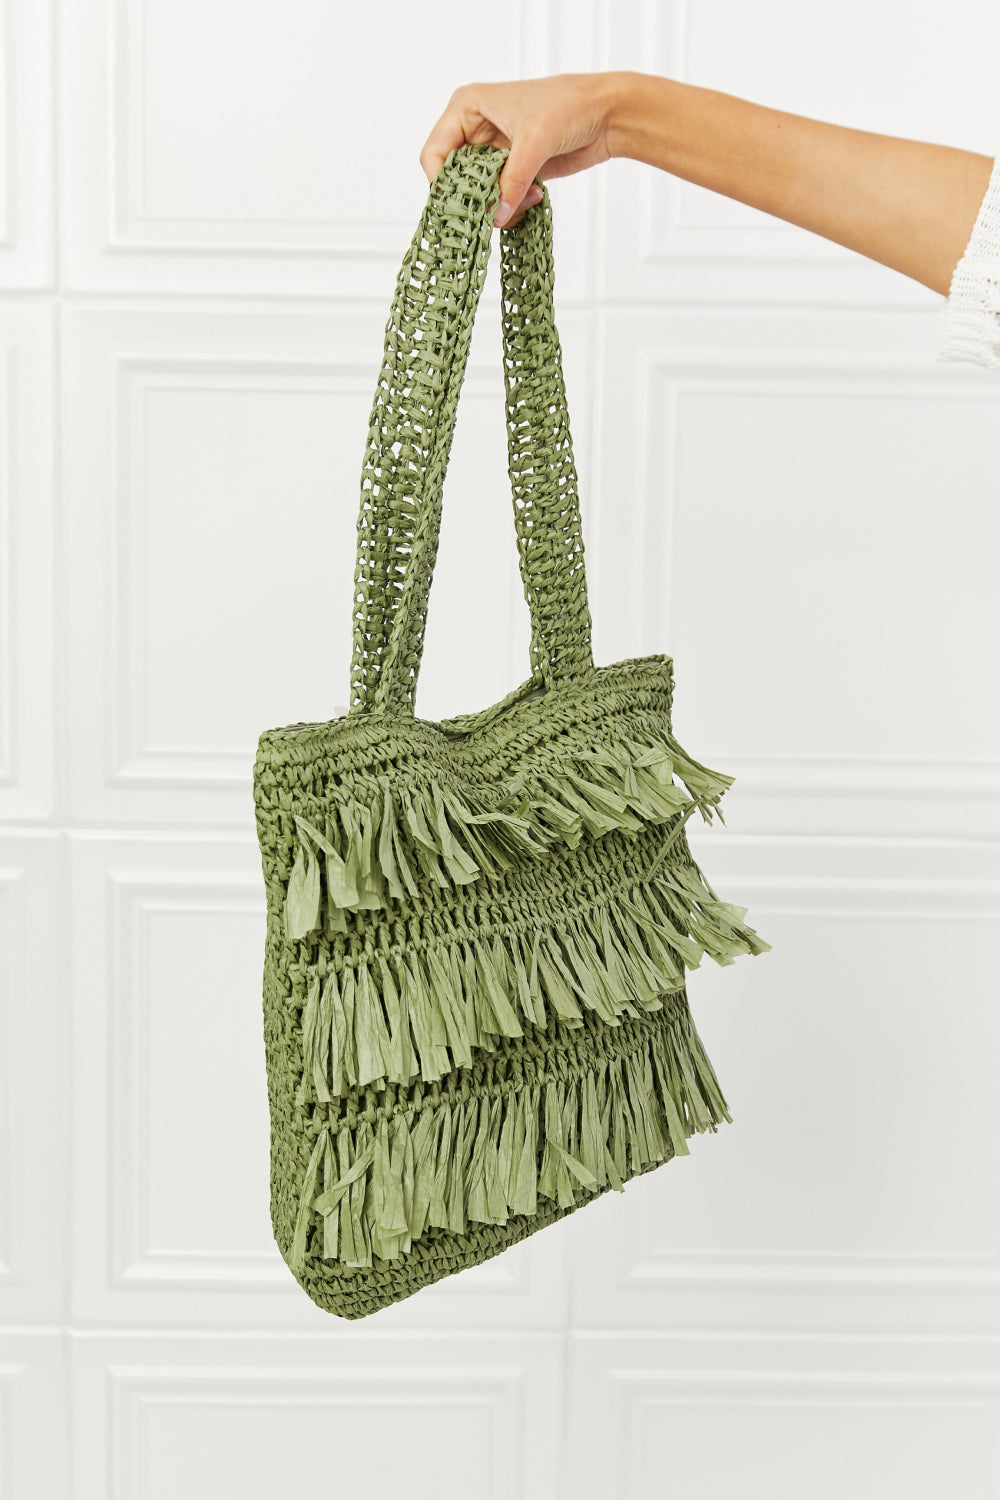 The Last Straw Fringe Straw Tote Bag  Southern Soul Collectives 